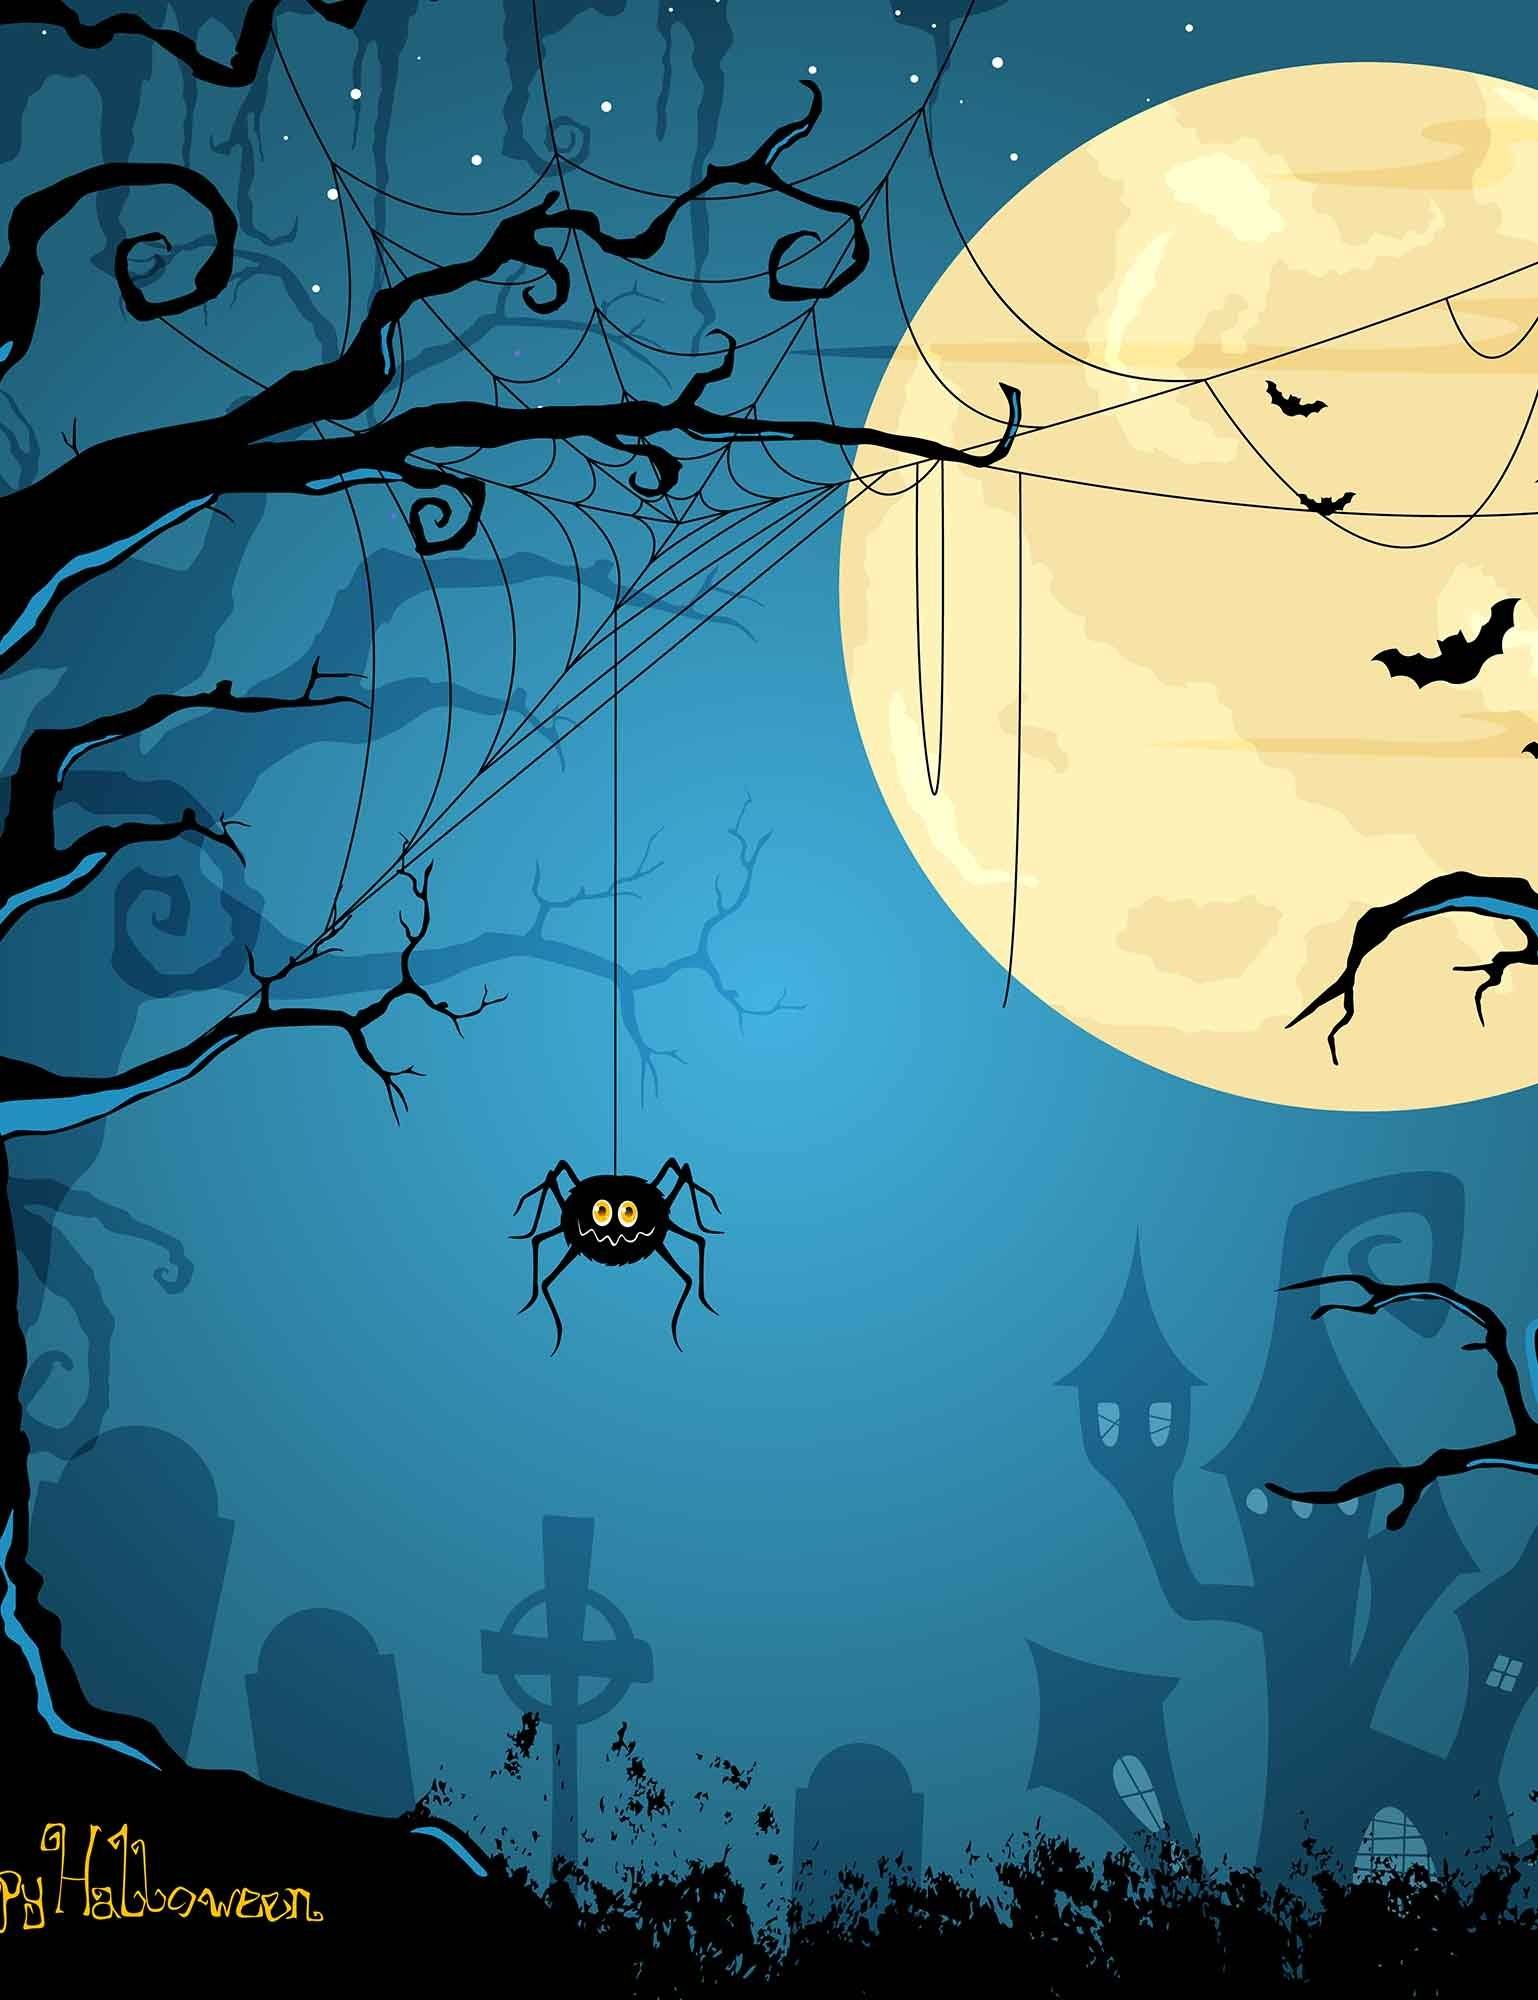 Printed Spider Dry Branches Full Moon Background For Halloween Backdrops Shopbackdrop